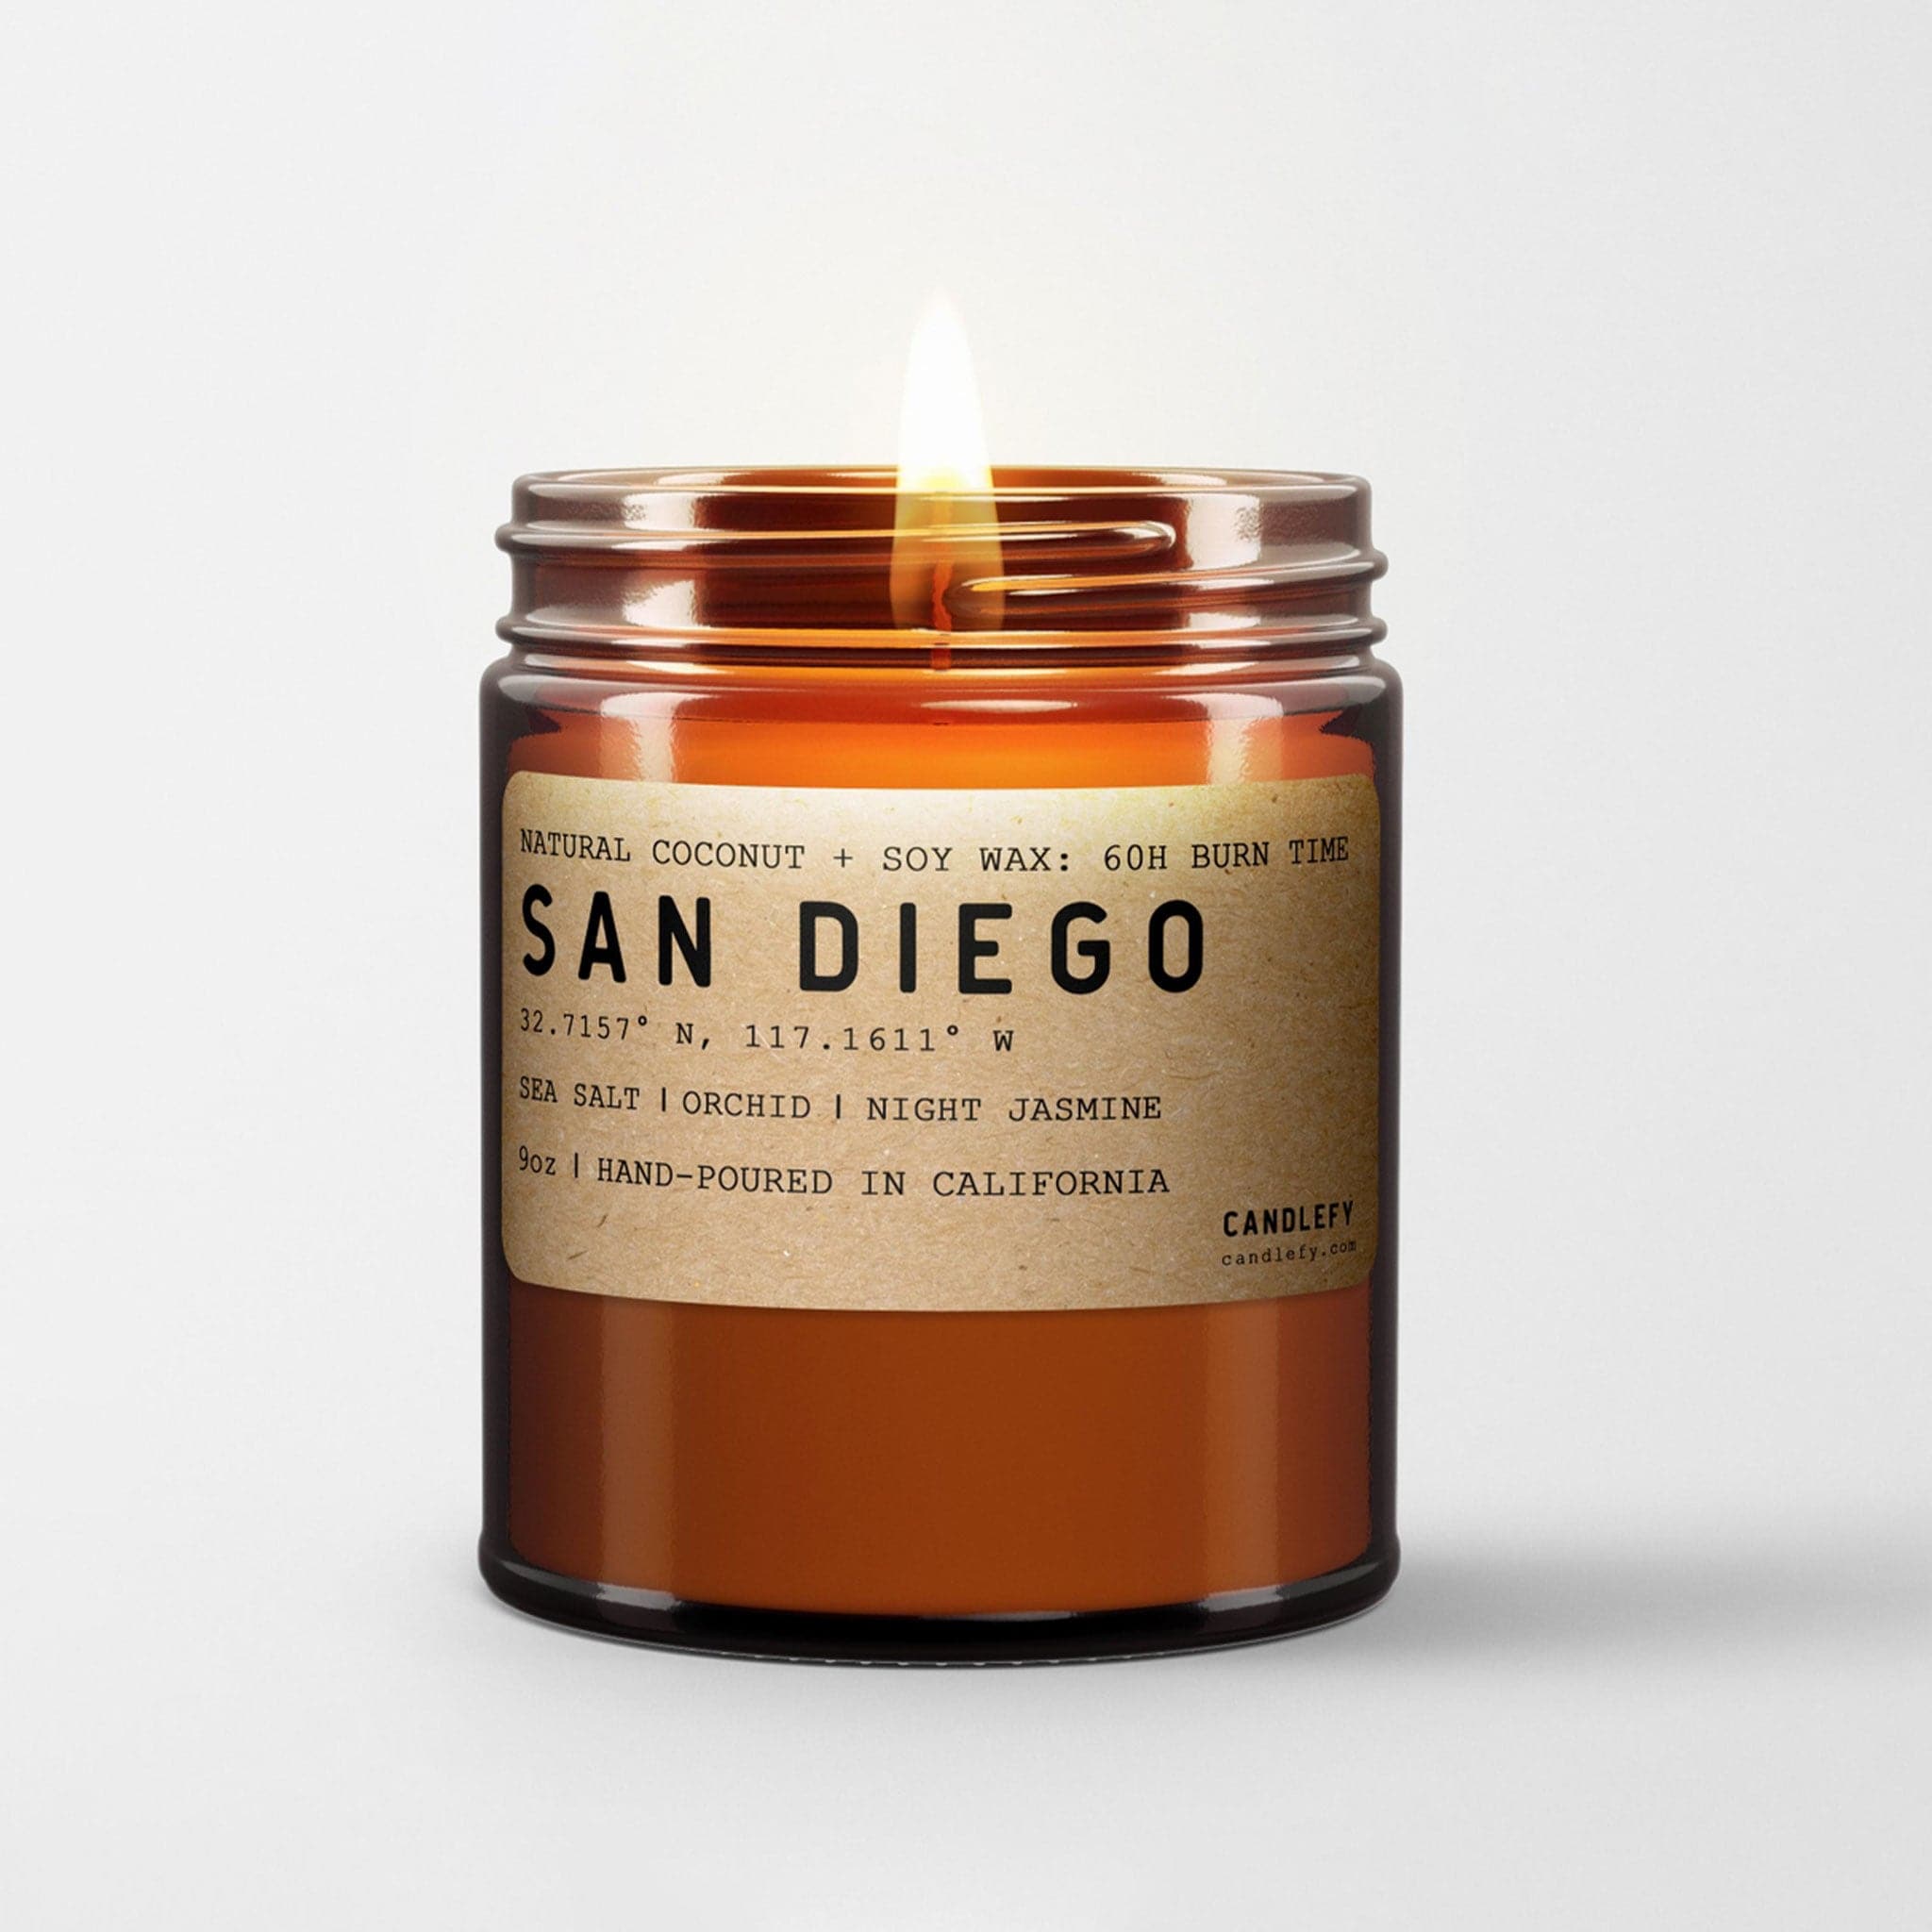 A glass amber jar with a natural colored label that reads, "San Diego" along with the details of the candle. This candle's scent is made of sea salt, orchid and night jasmine.